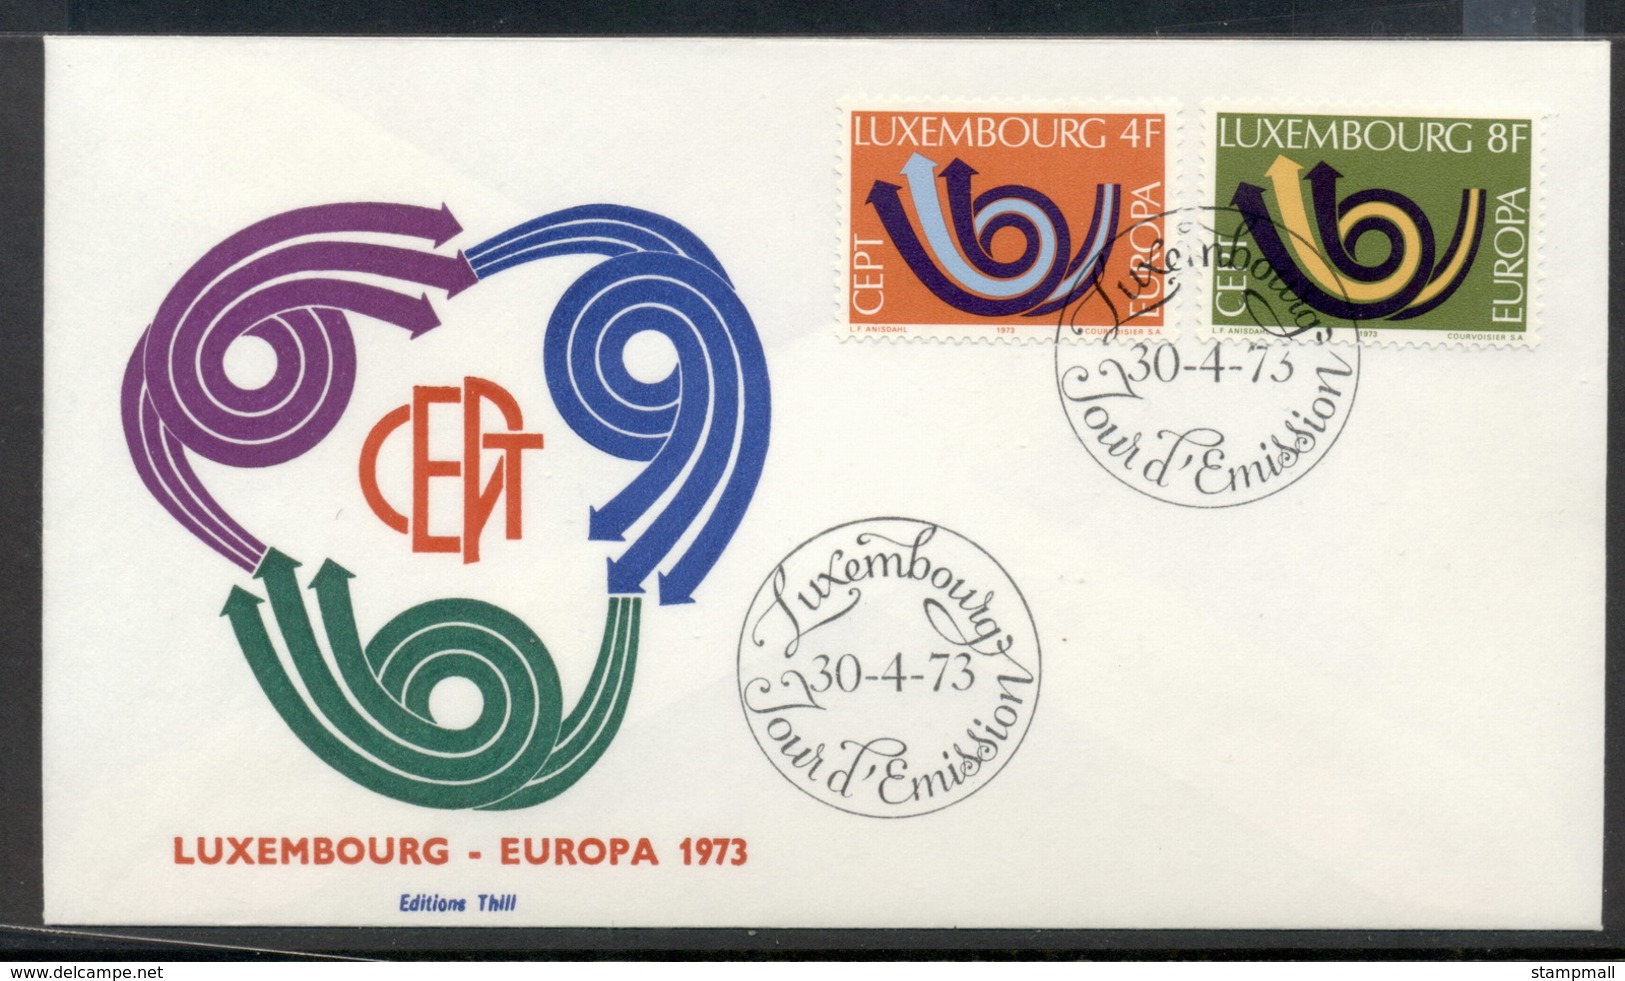 Luxembourg 1973 Europa Posthorn Arrow FDC - FDC